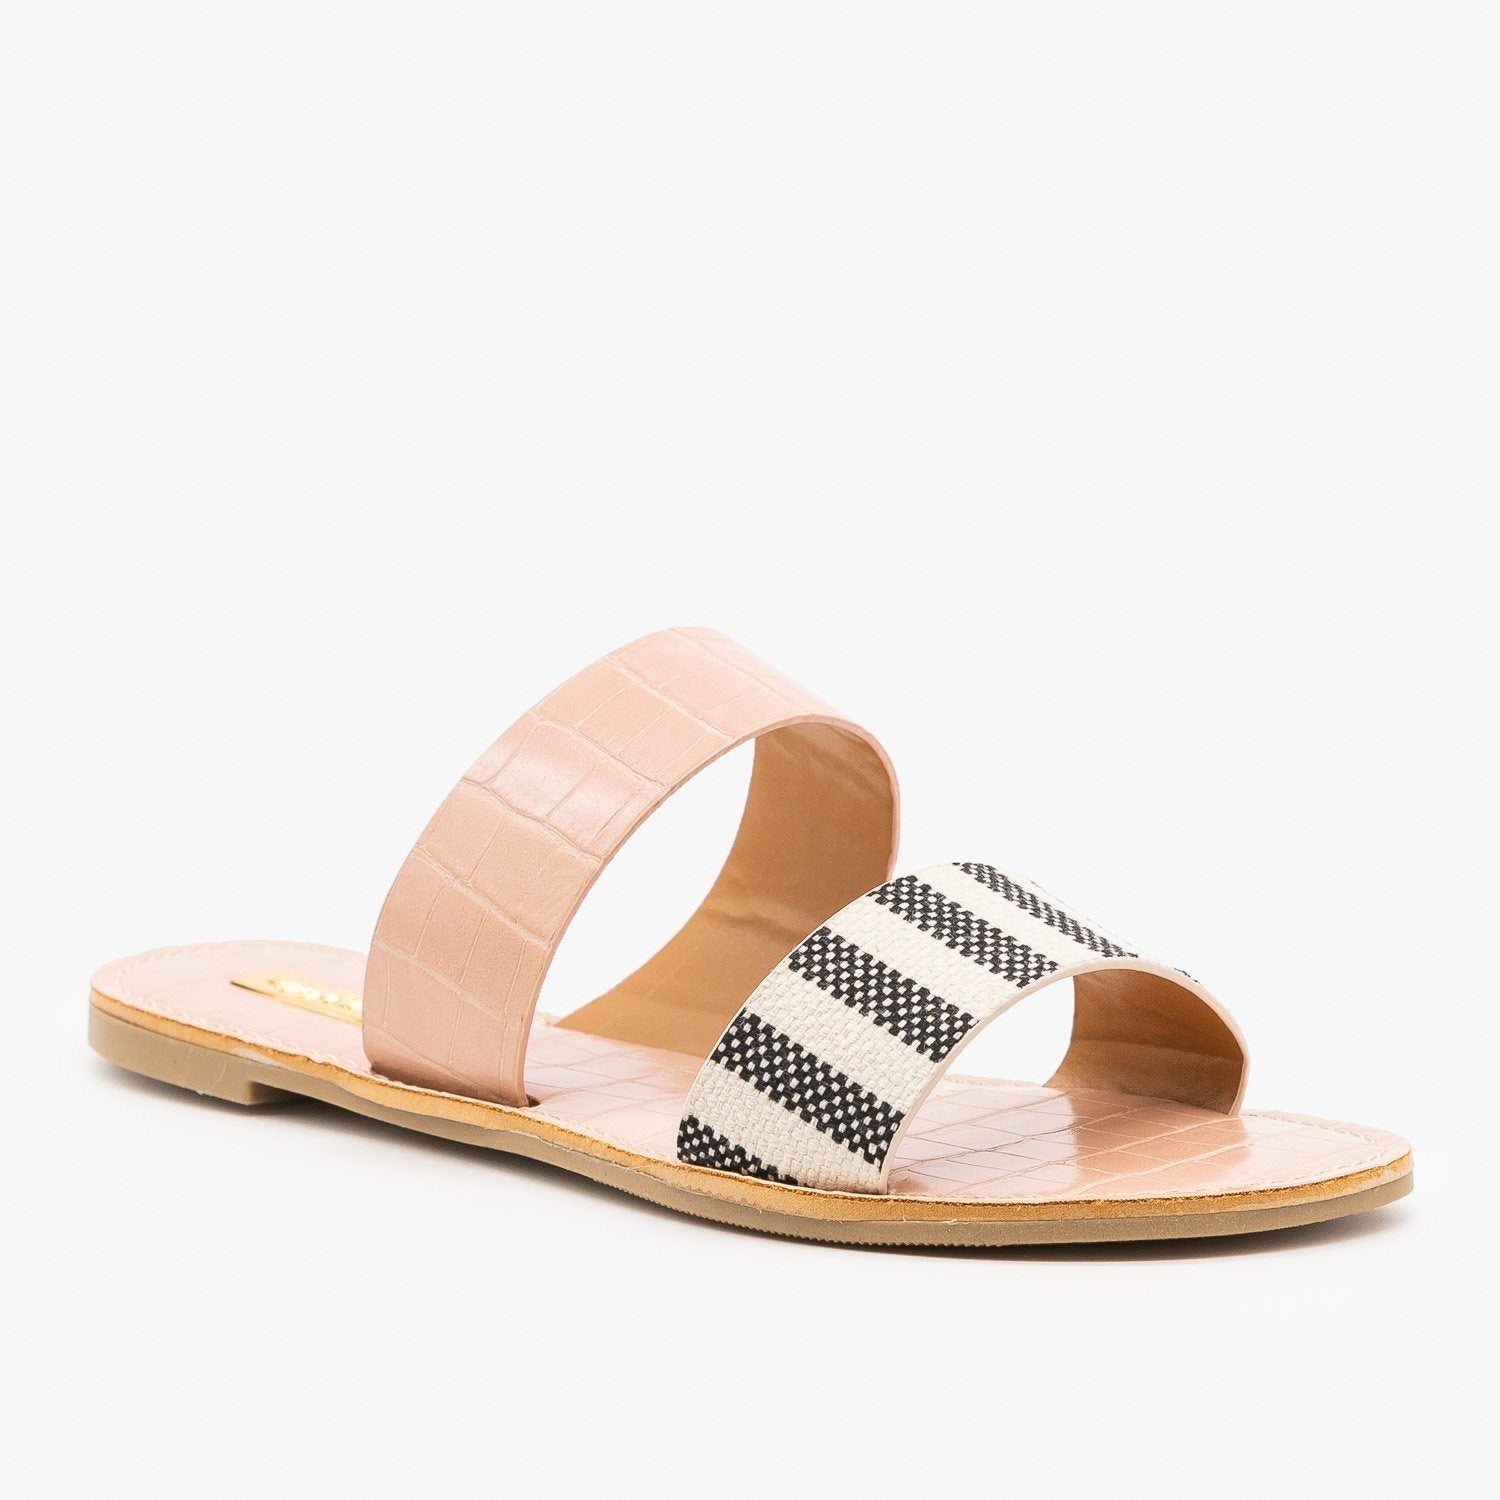 Double Strap Patterned Sandals - Qupid 